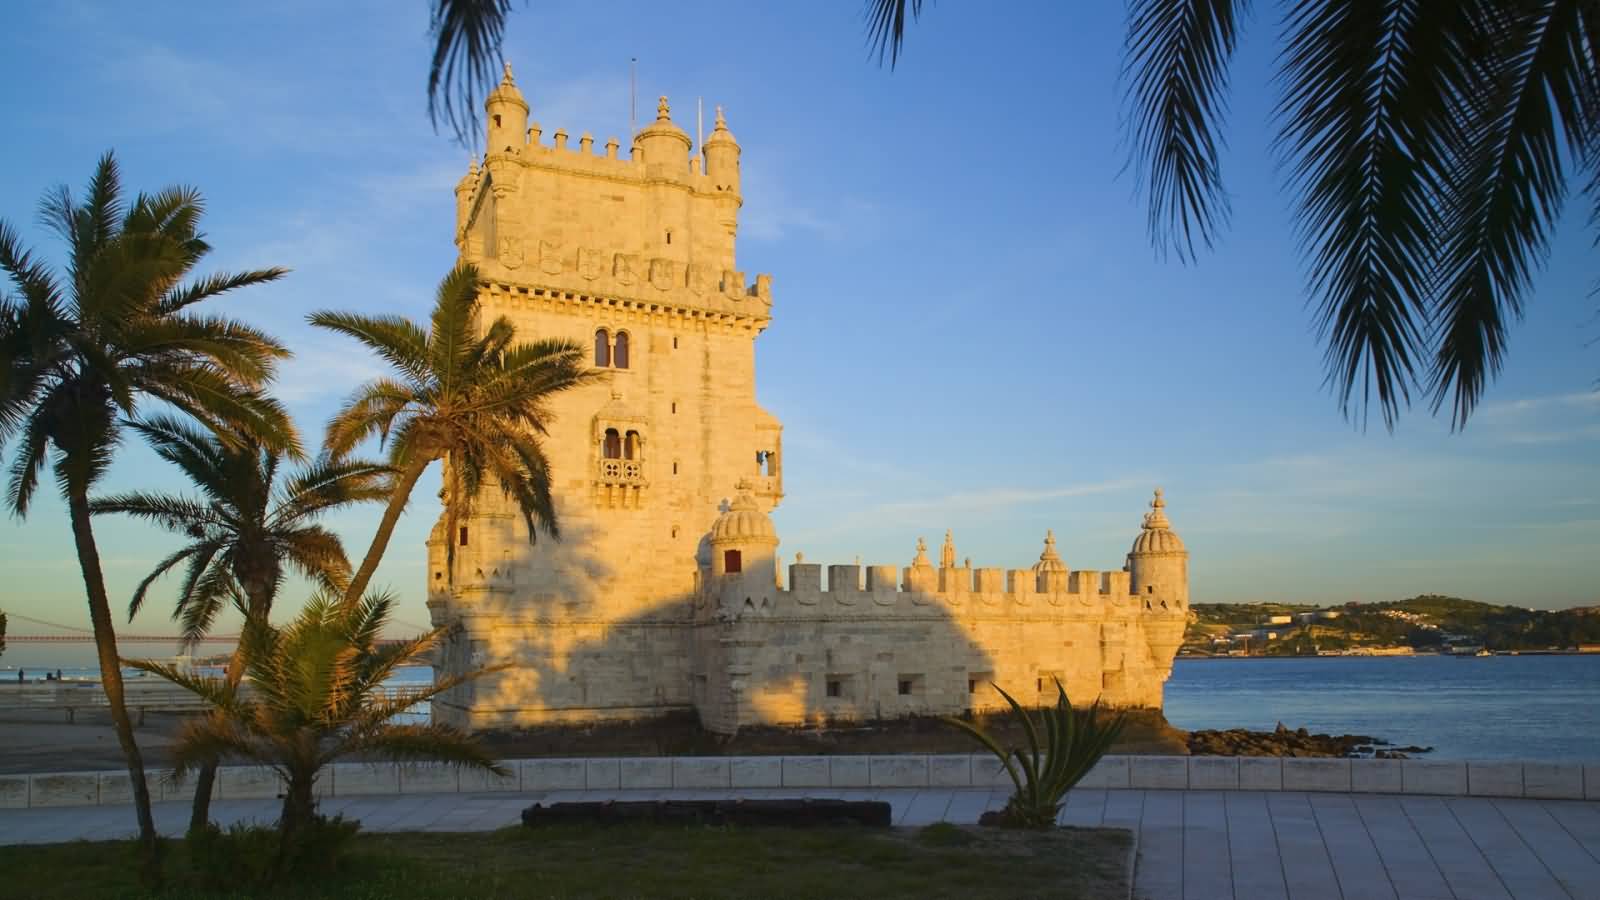 Adorable Belem Tower View During Sunset